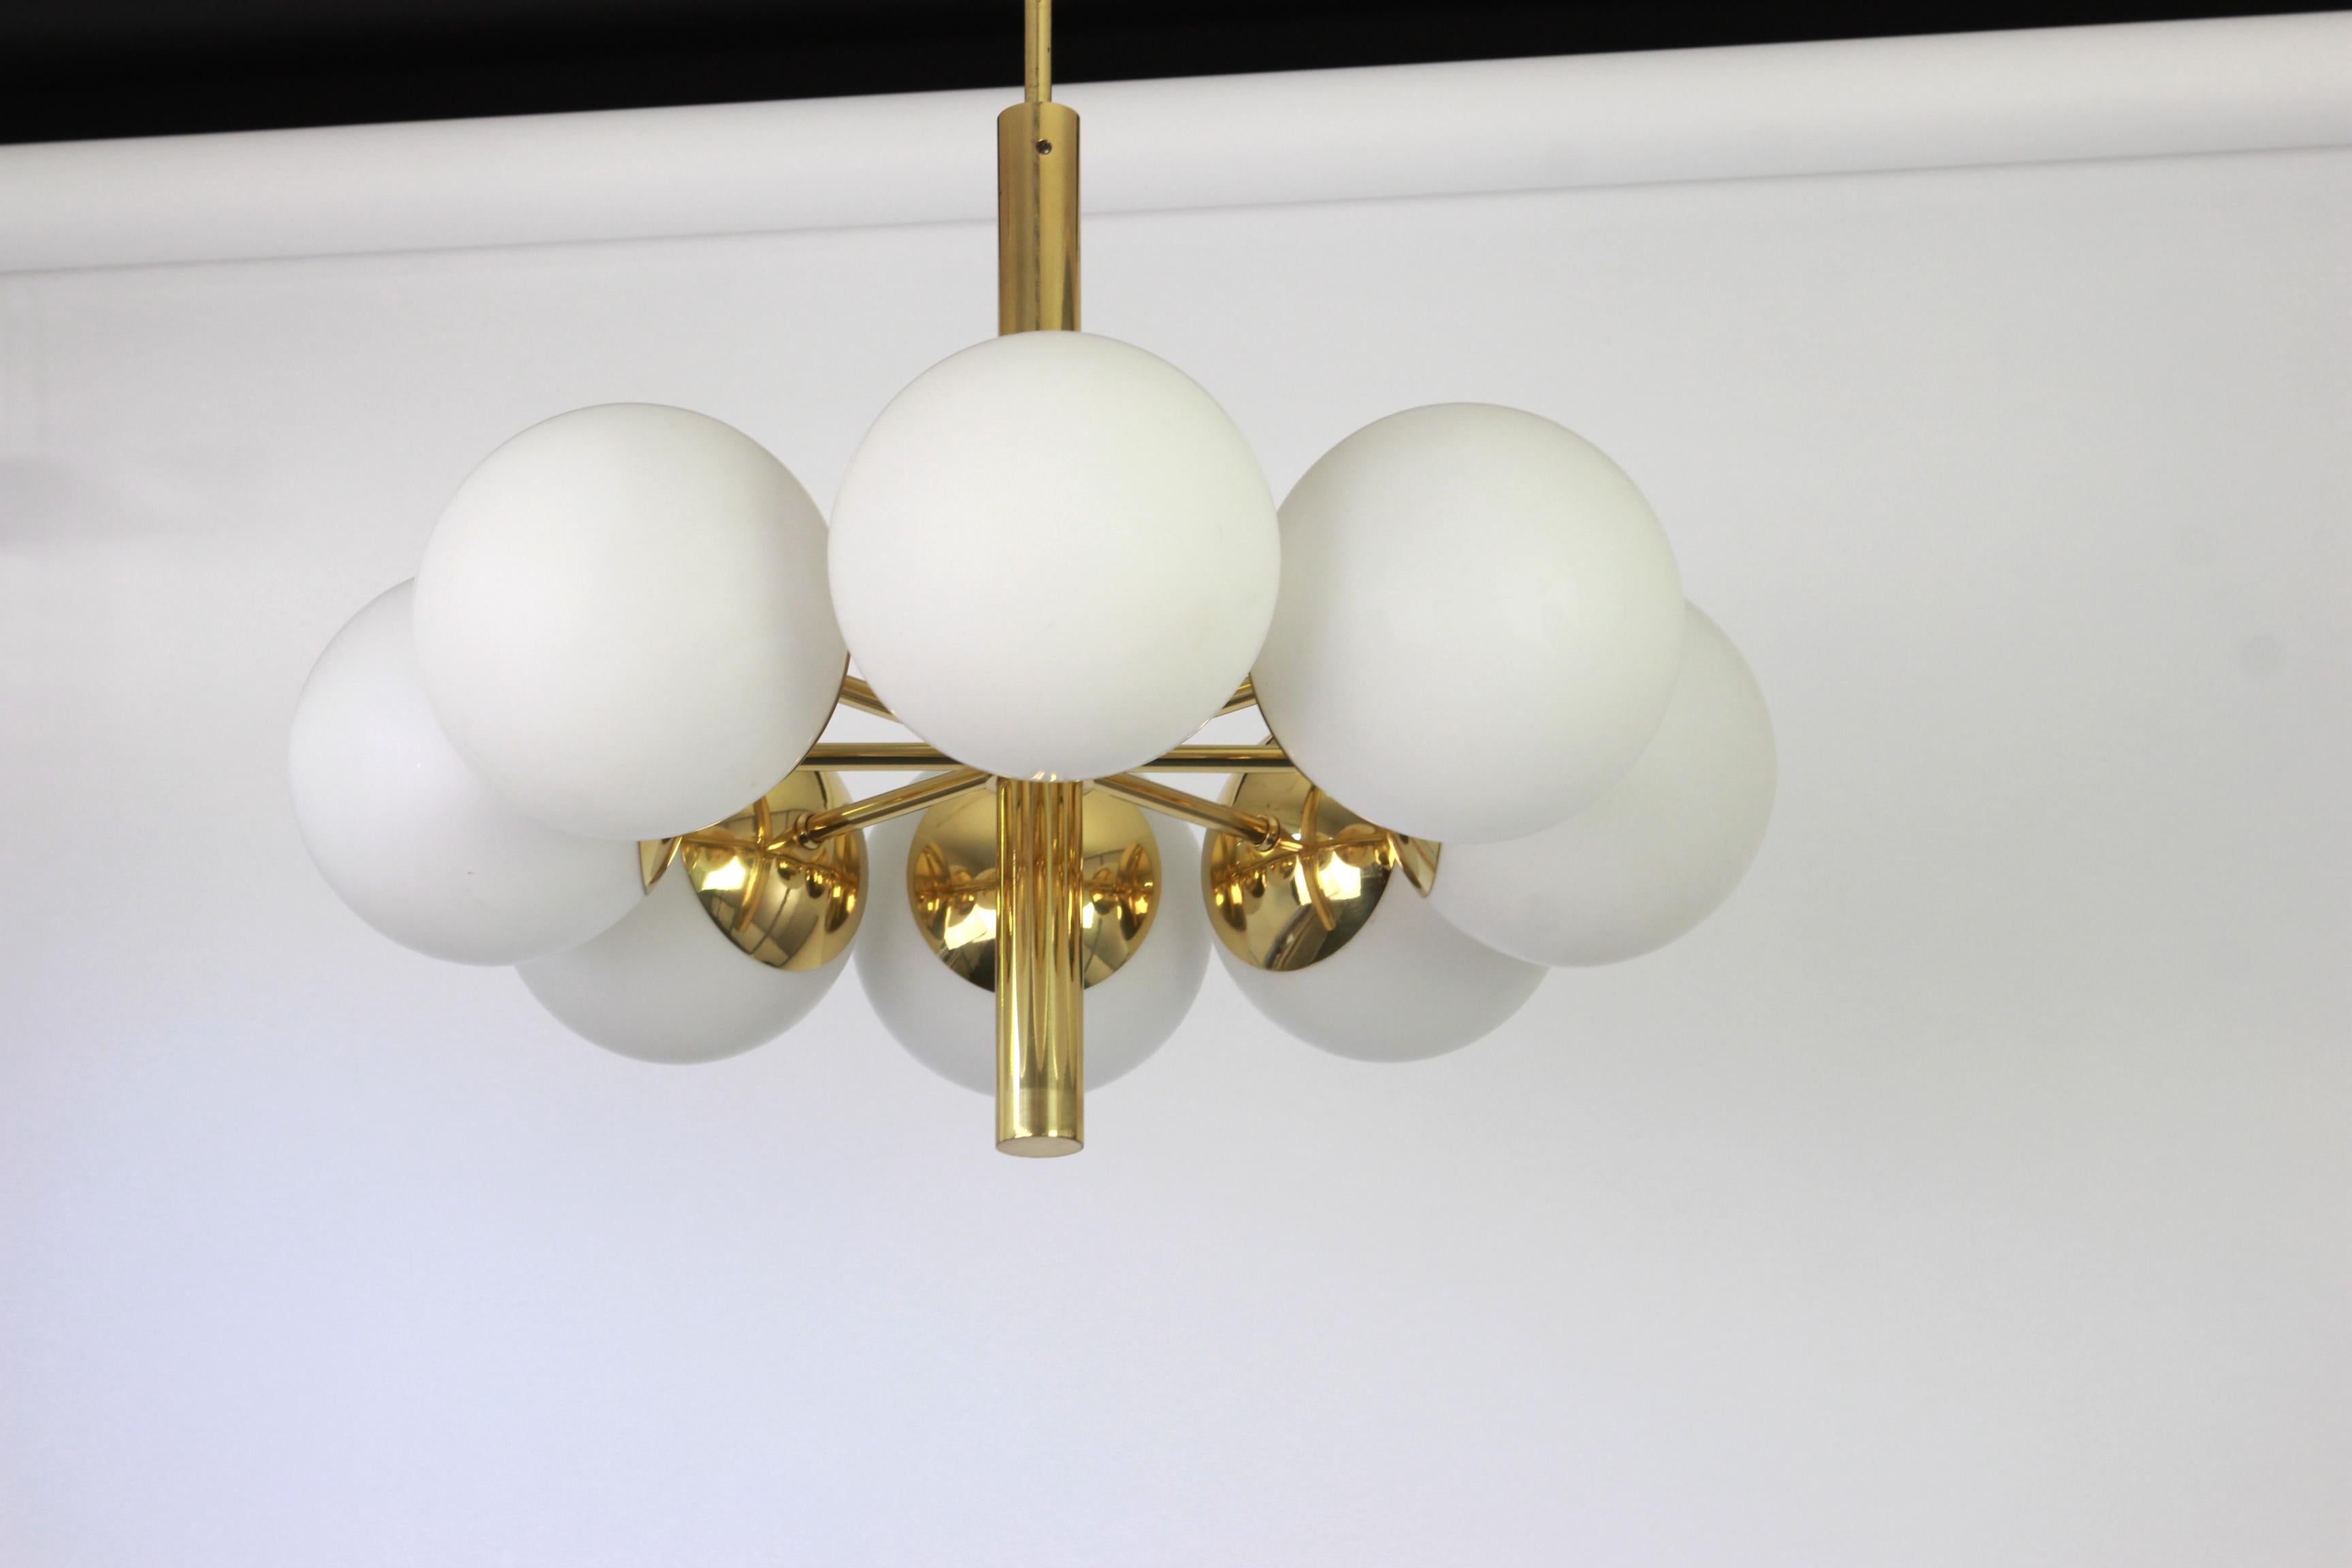 Stunning radial Sputnik brass chandelier with eight opal glass globes by Kaiser Leuchten, Germany, 1960s.

High quality and in very good condition. Cleaned, well-wired and ready to use. 

The fixture requires 8 x E14 standard bulbs with 40W max